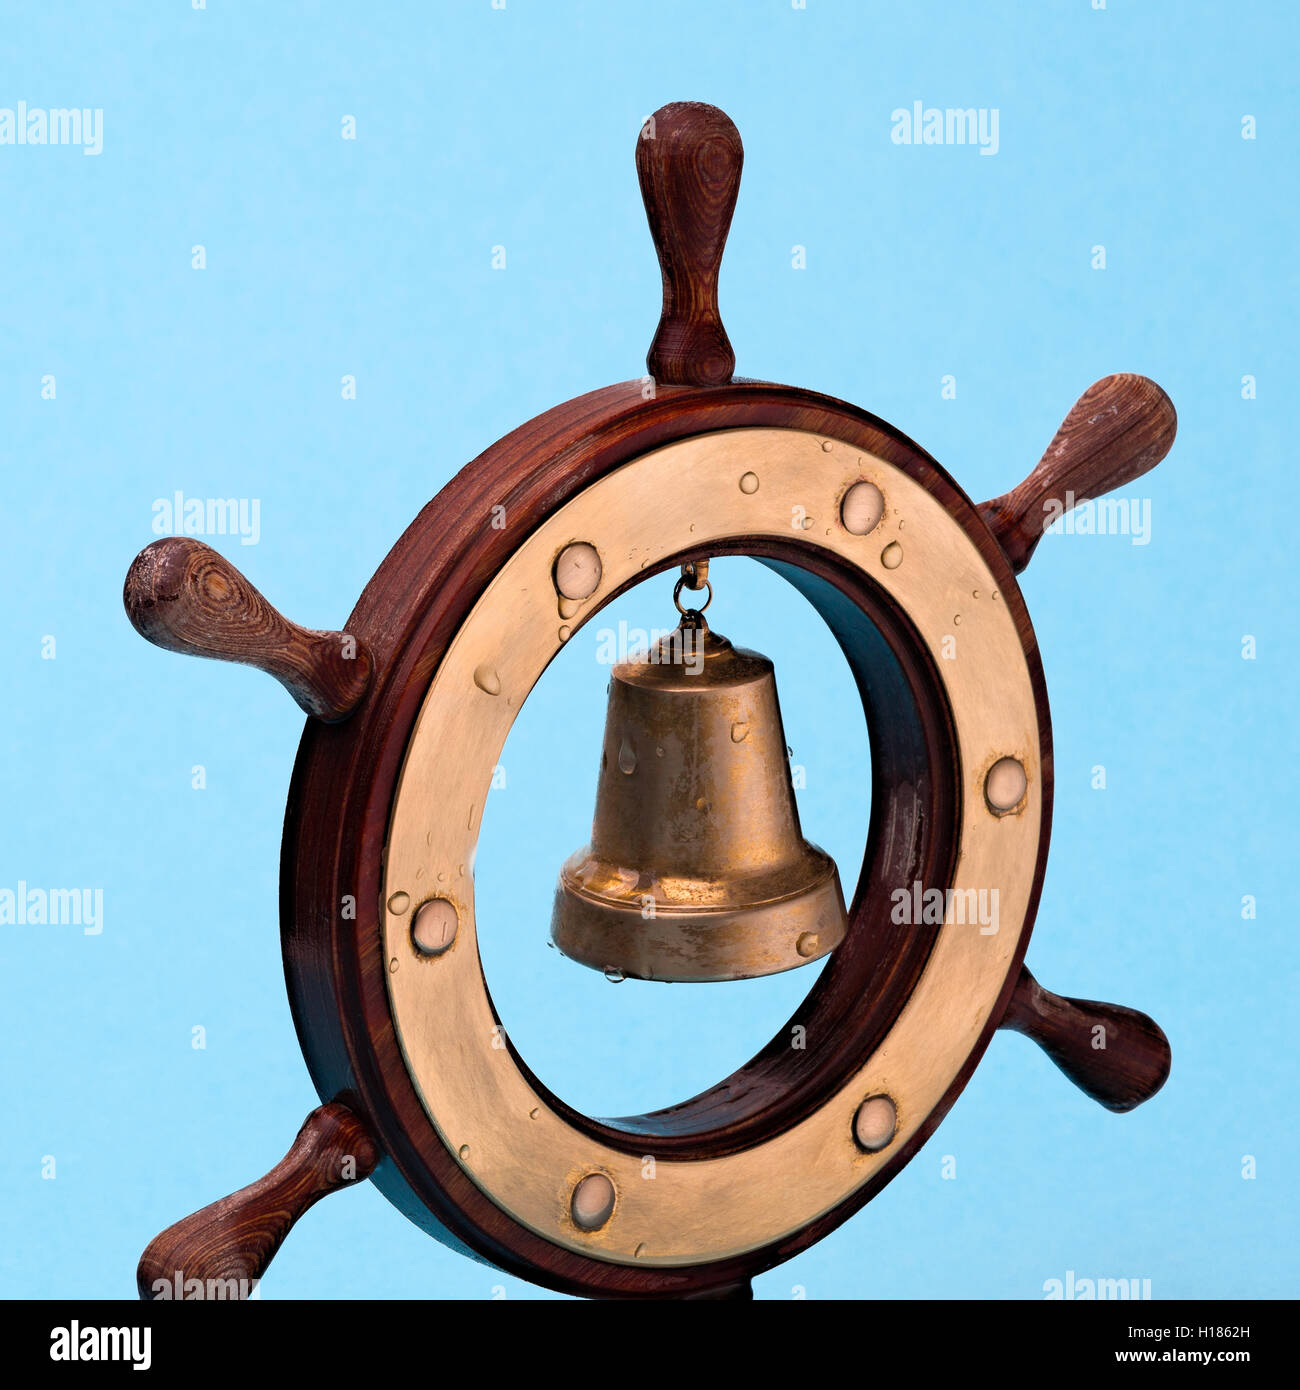 Decorative wood and brass toy helm or steering wheel and a ship's bell against pale blue background. Drops of sea water. Stock Photo